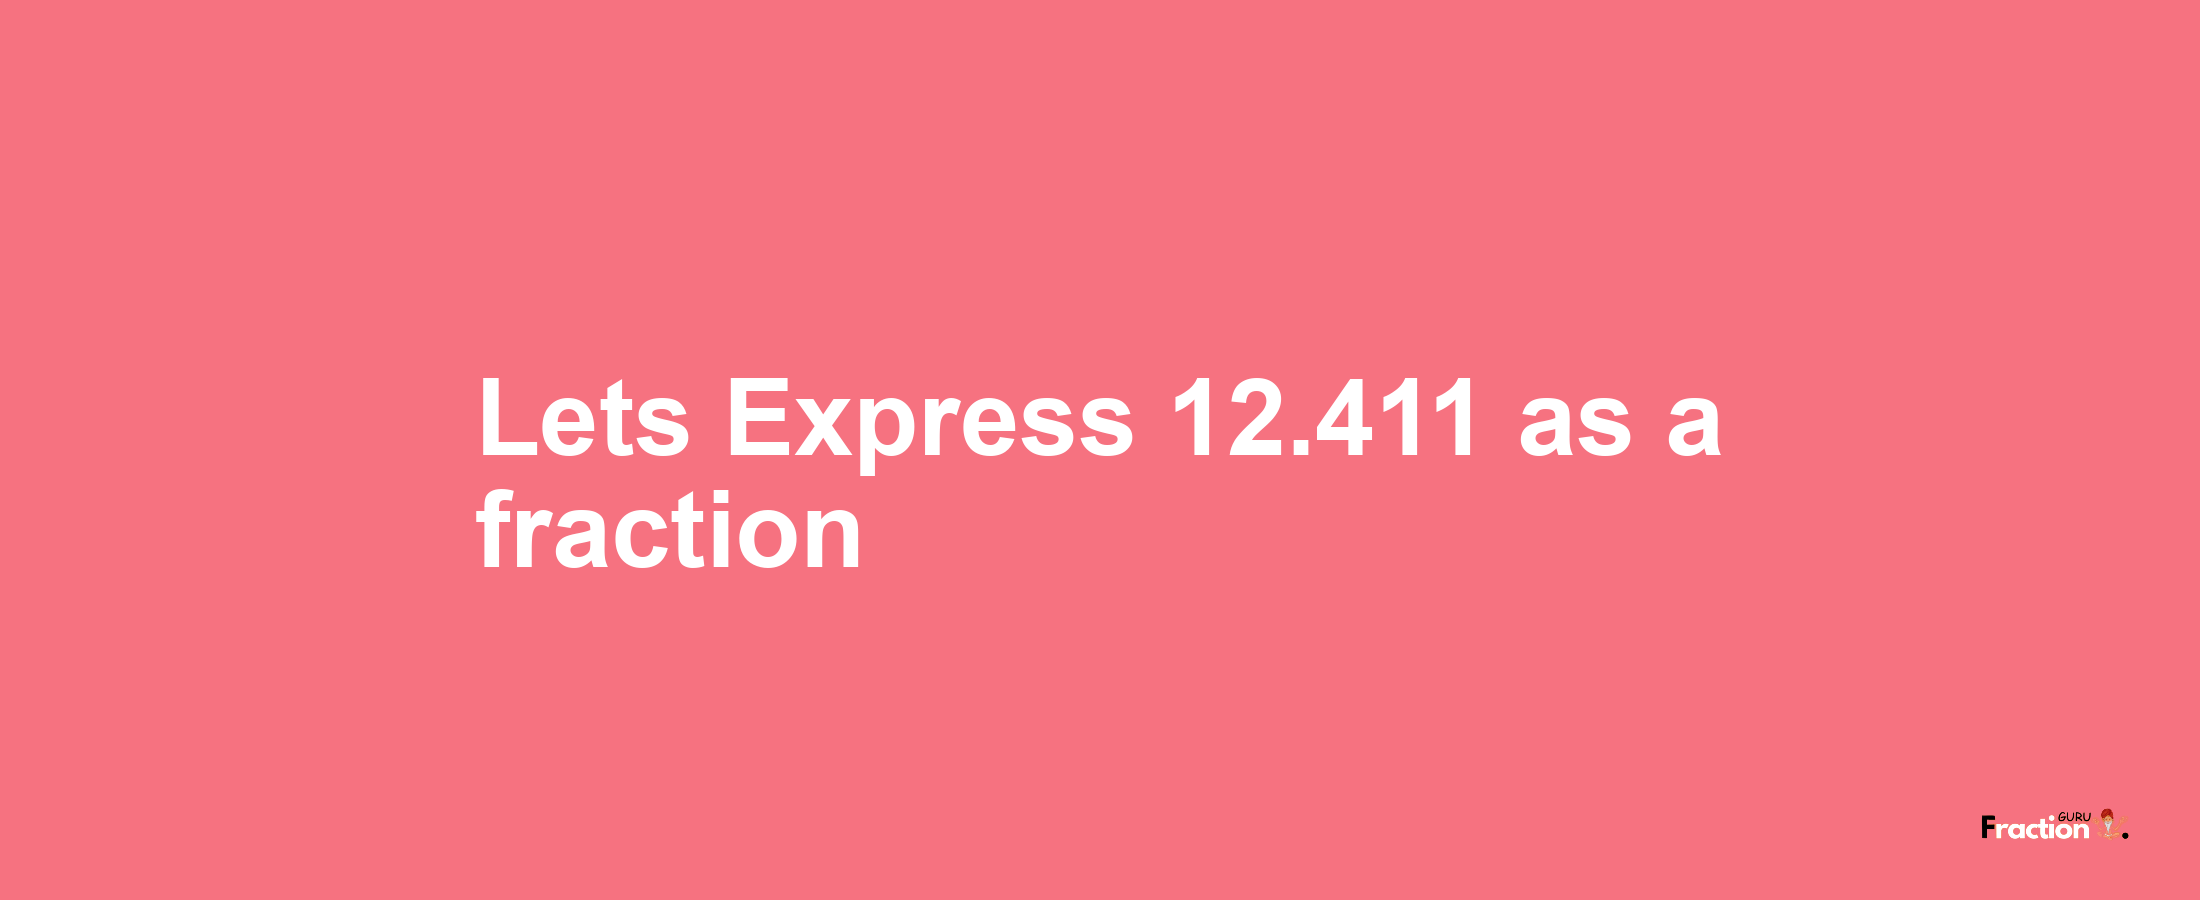 Lets Express 12.411 as afraction